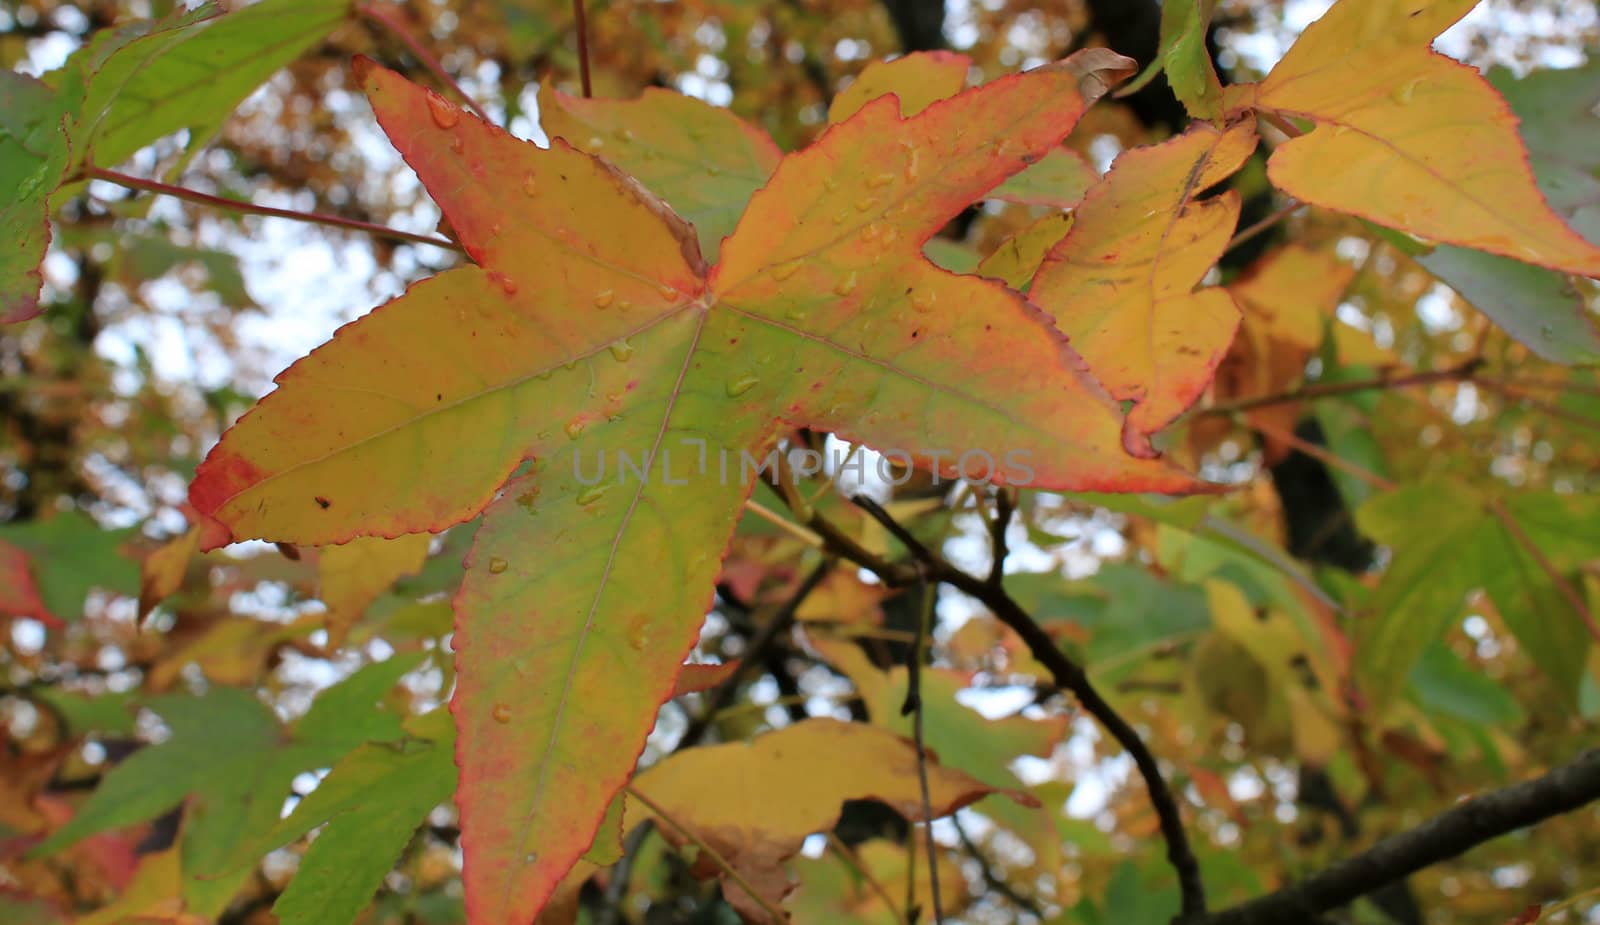 Close up of a red autumn leaf covered with waterdrops in the forest